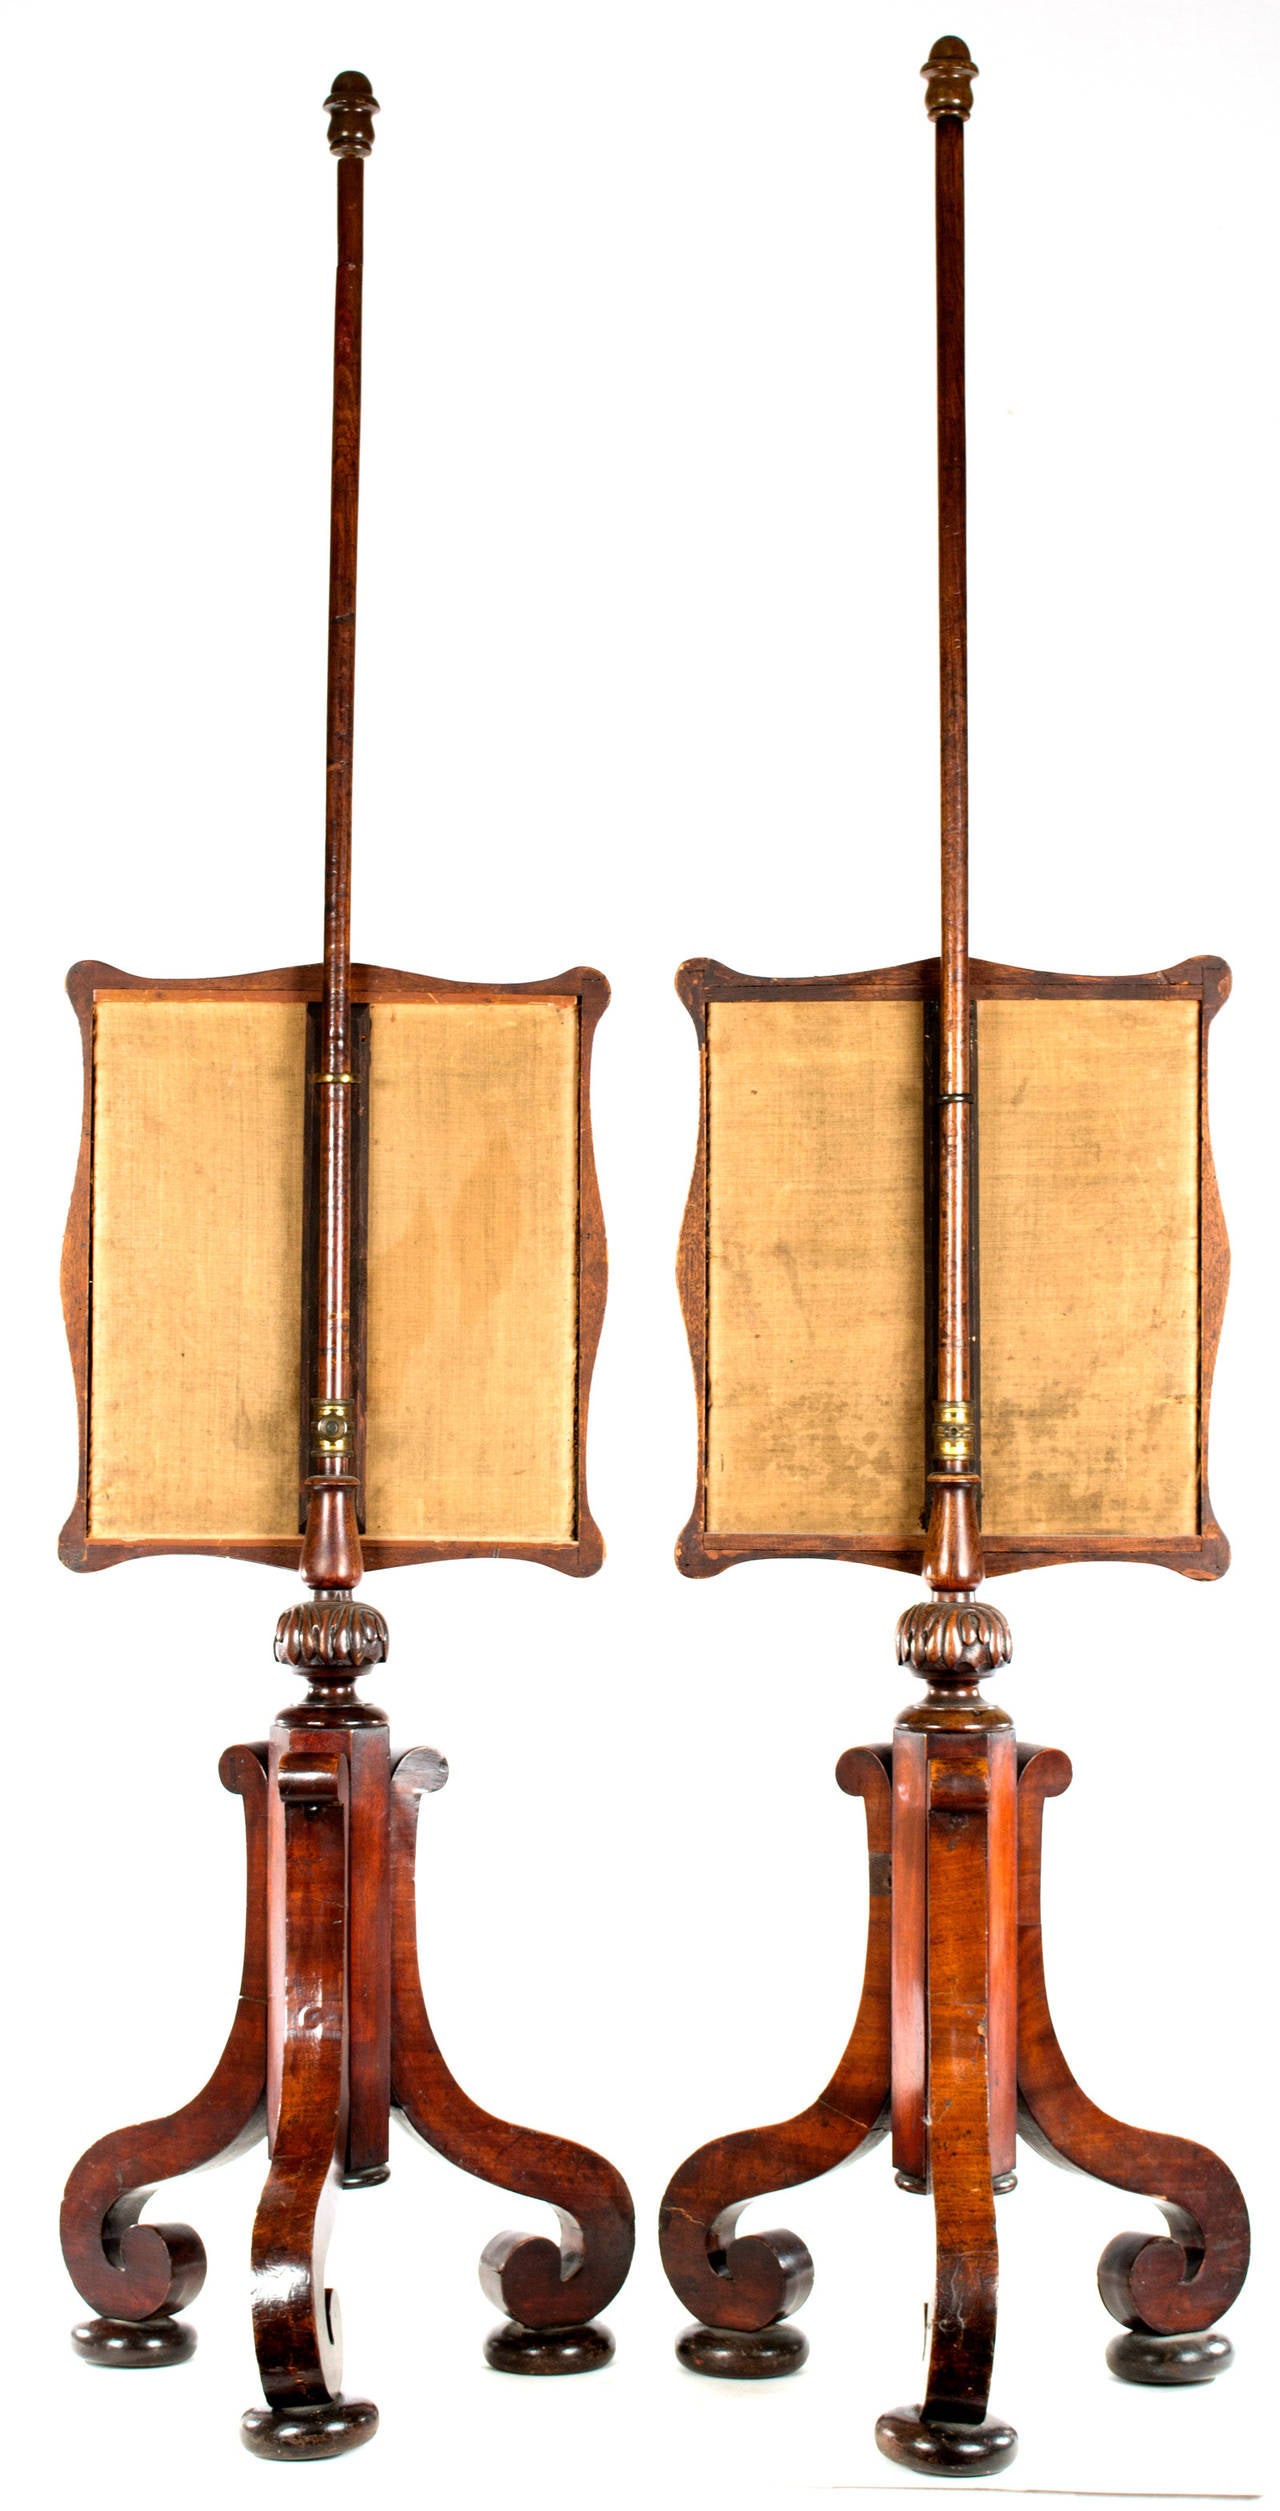 Two very fine English fire or hearth screens dating from the third quarter of the nineteenth century. Each embroidered silk screen is encased in and attached to a three-footed Stand of figured mahogany. The screens shield from the heat of the fire